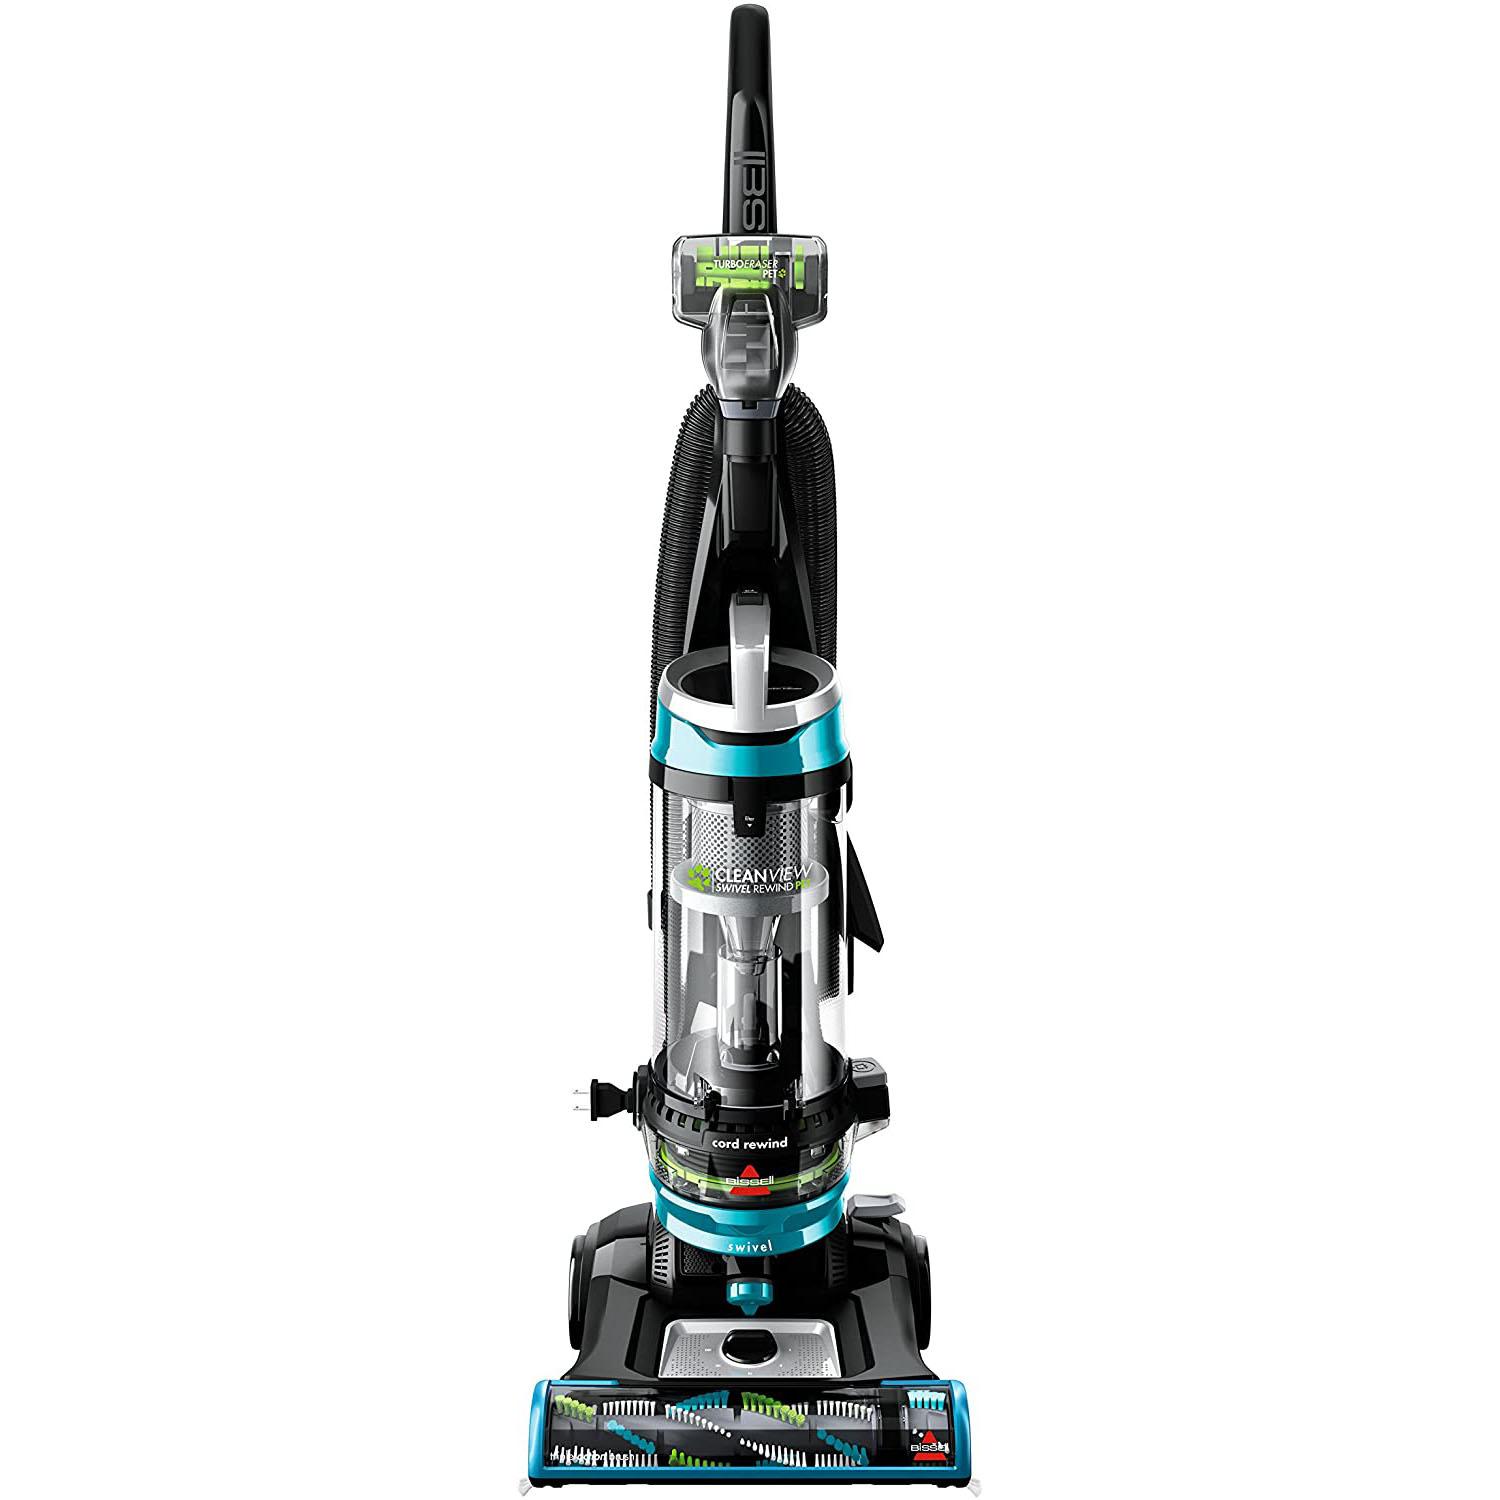 Bissell Cleanview Swivel Rewind Pet Upright Bagless Vacuum Cleaner for $97.99 Shipped